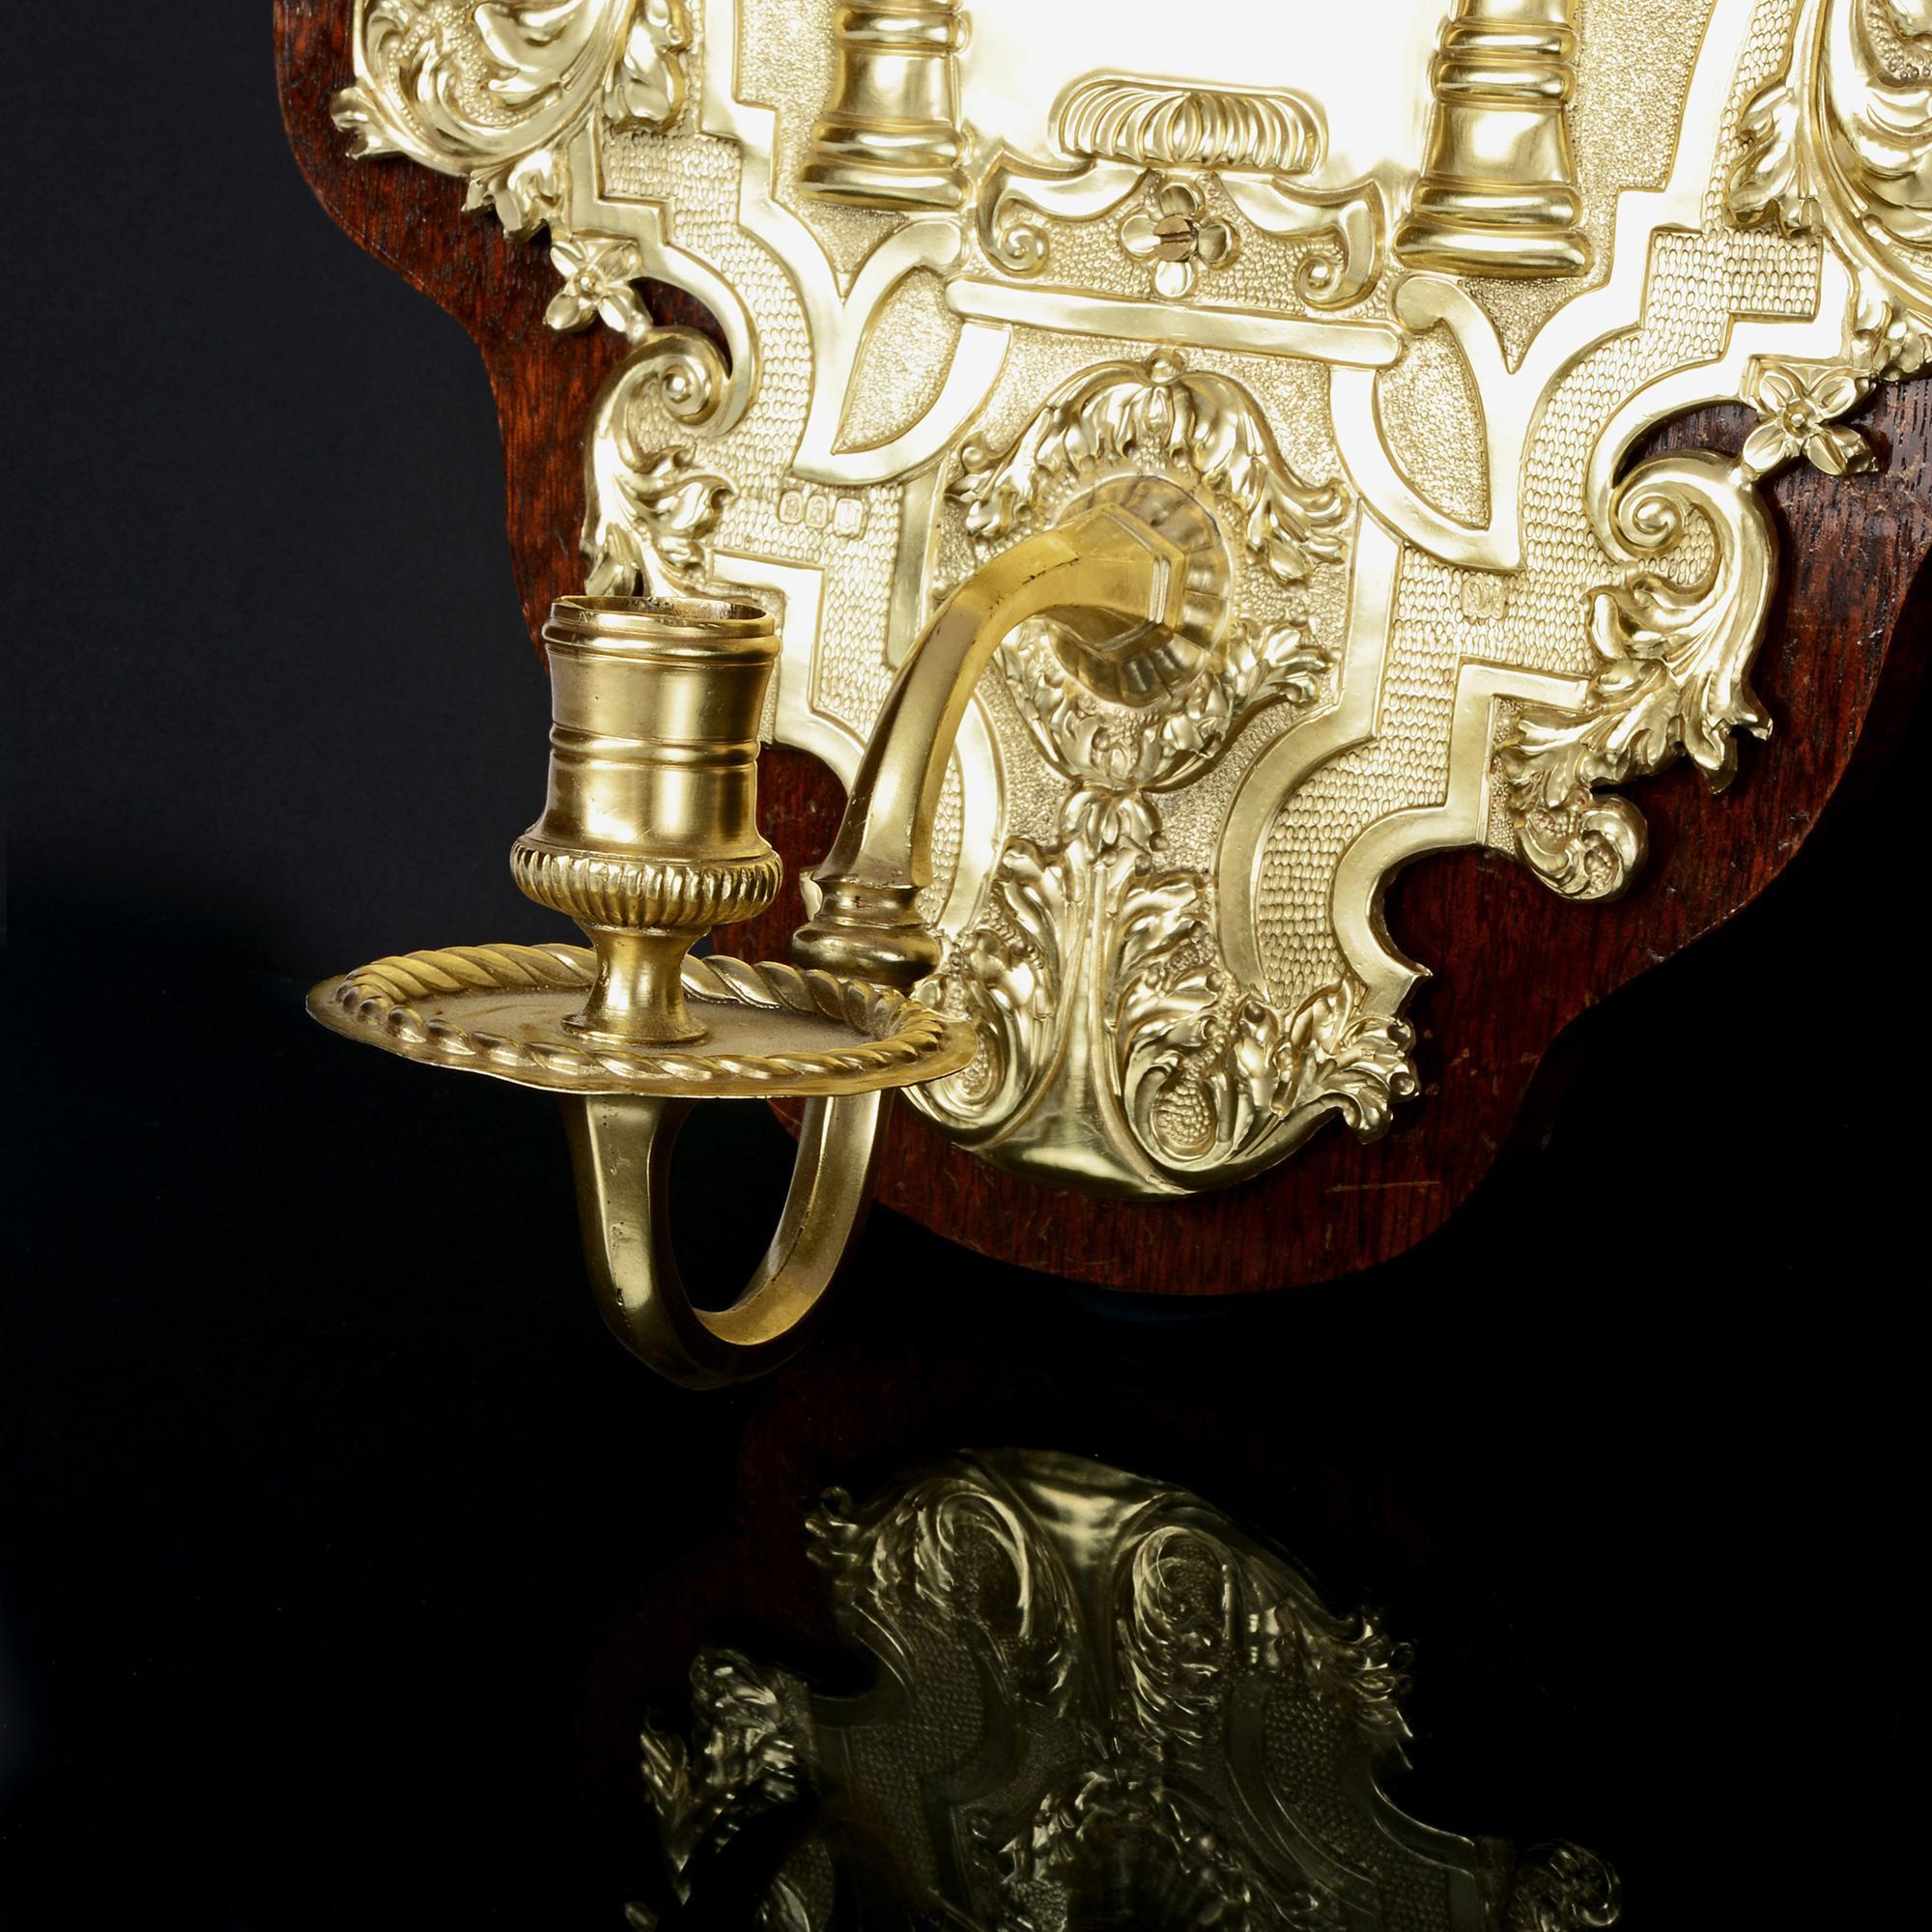 Supported on polished wood mounts, this pair of highly decorative antique Britannia silver-gilt wall sconces are hand-chased in an 18th century style that would have been popular circa 1730. Britannia silver is more pure than sterling silver (958